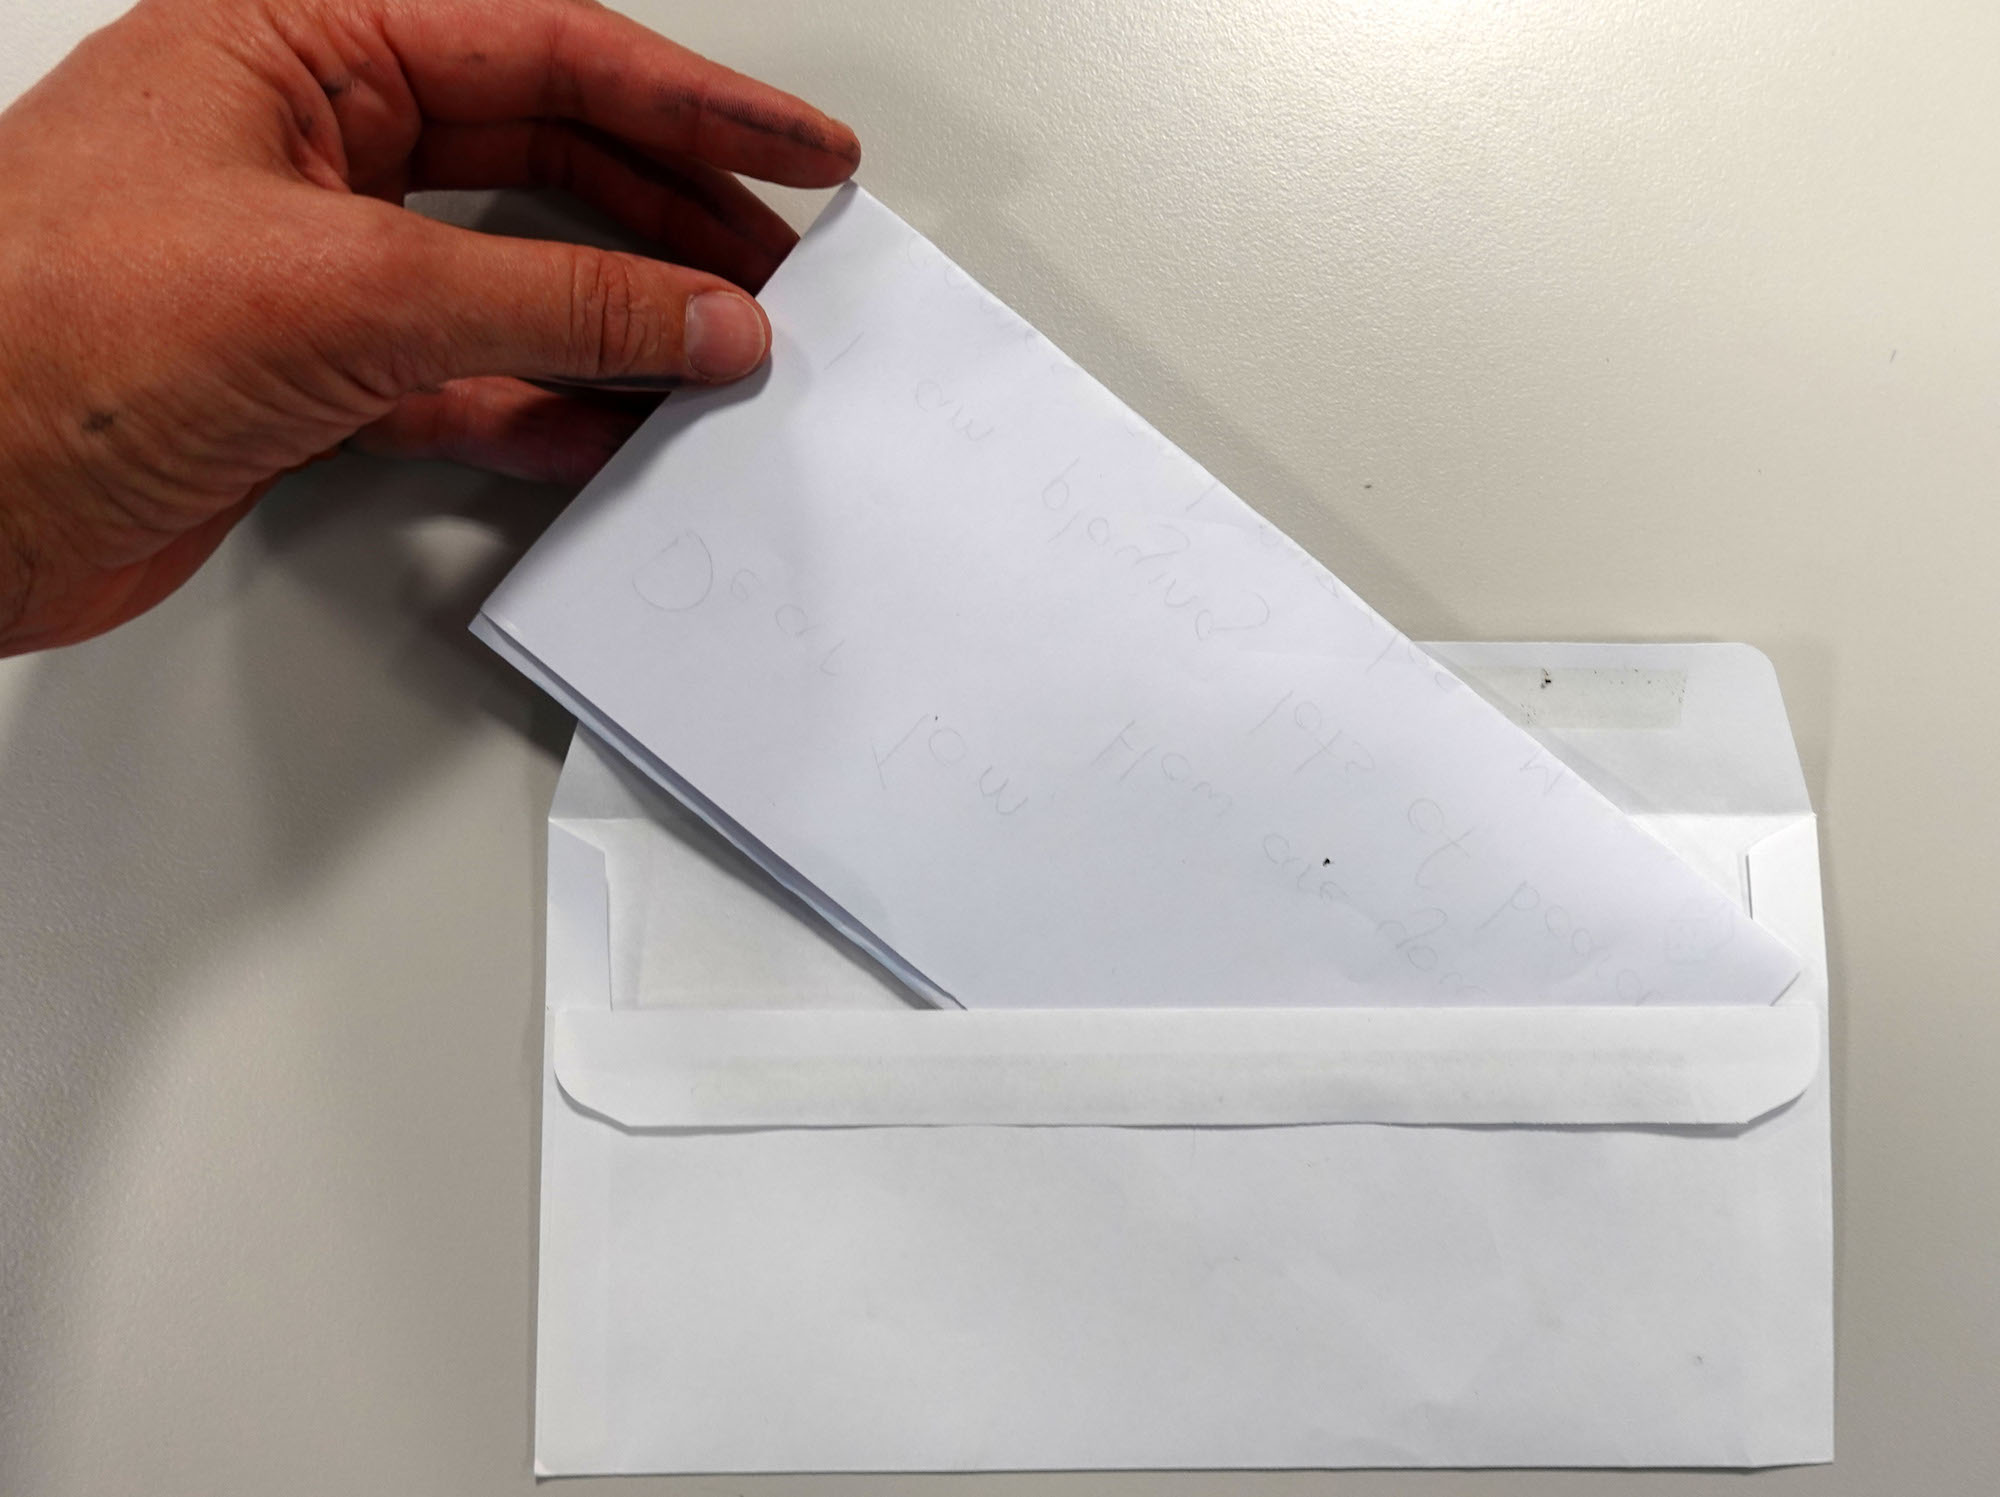 A letter being inserted into an envelope